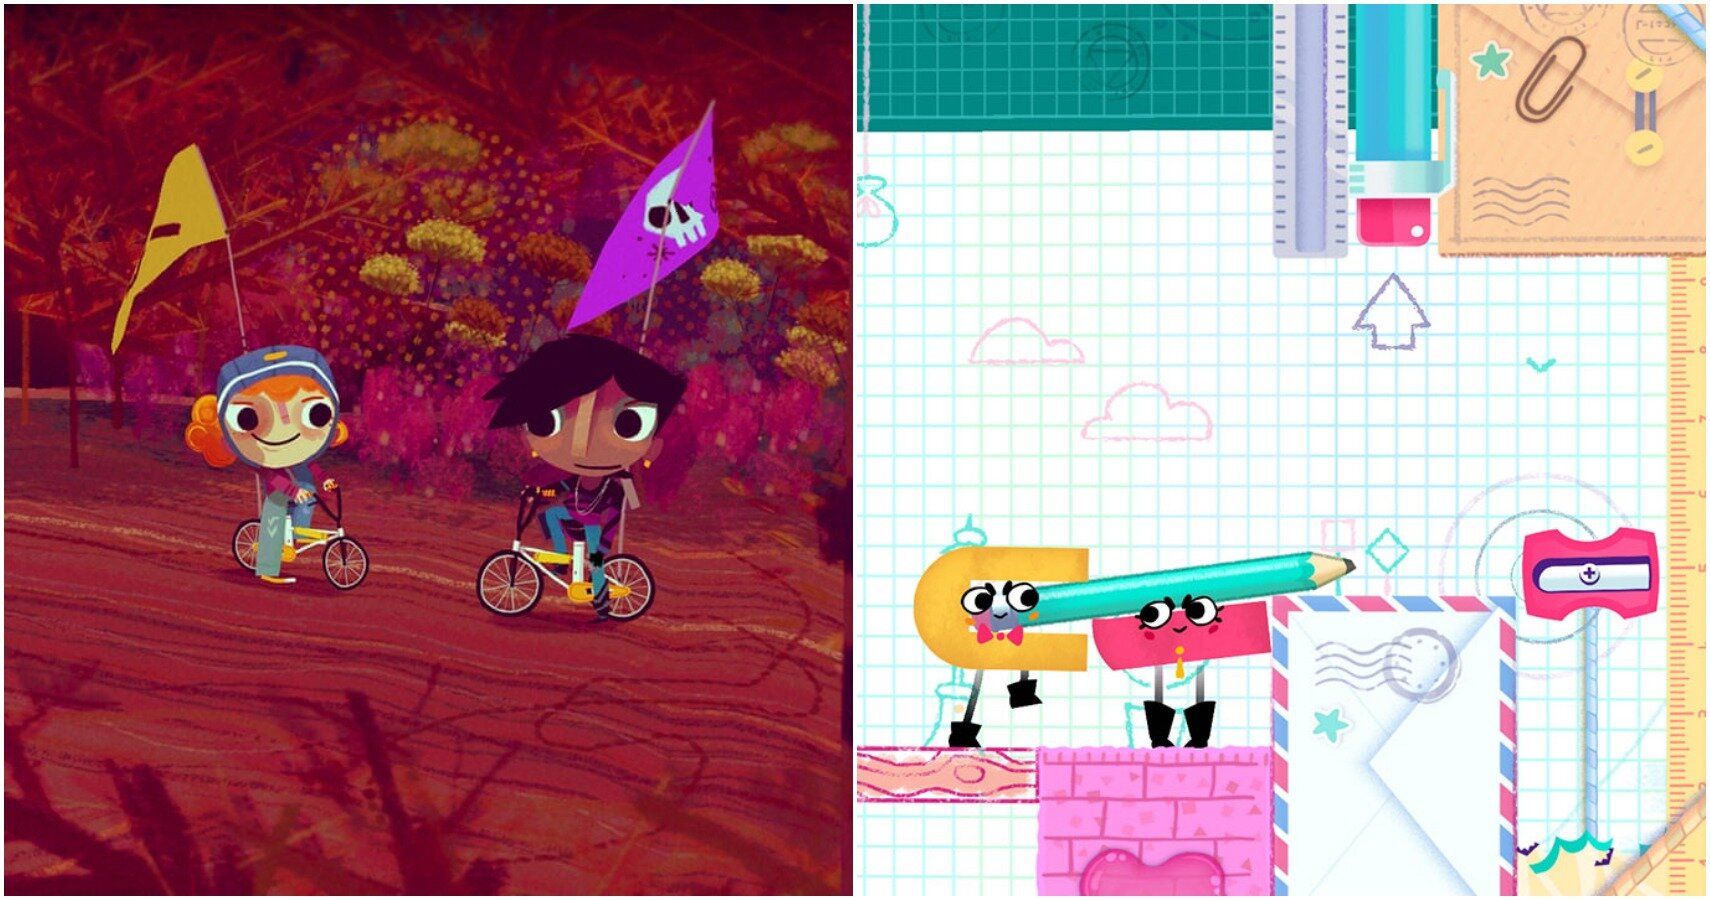 Screenshots from Knights and Bikes (left) and Snipperclips (right)